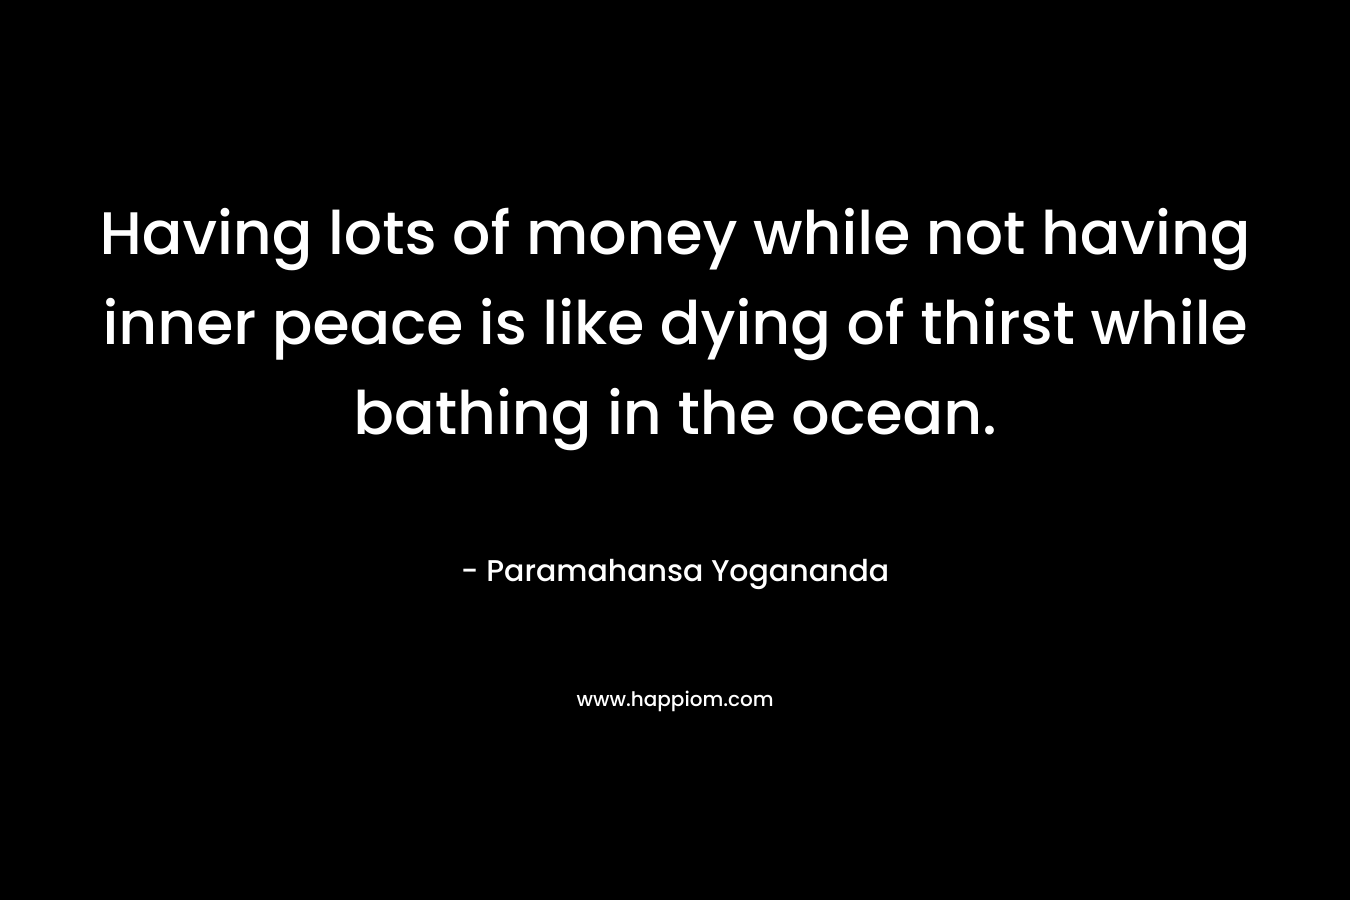 Having lots of money while not having inner peace is like dying of thirst while bathing in the ocean.